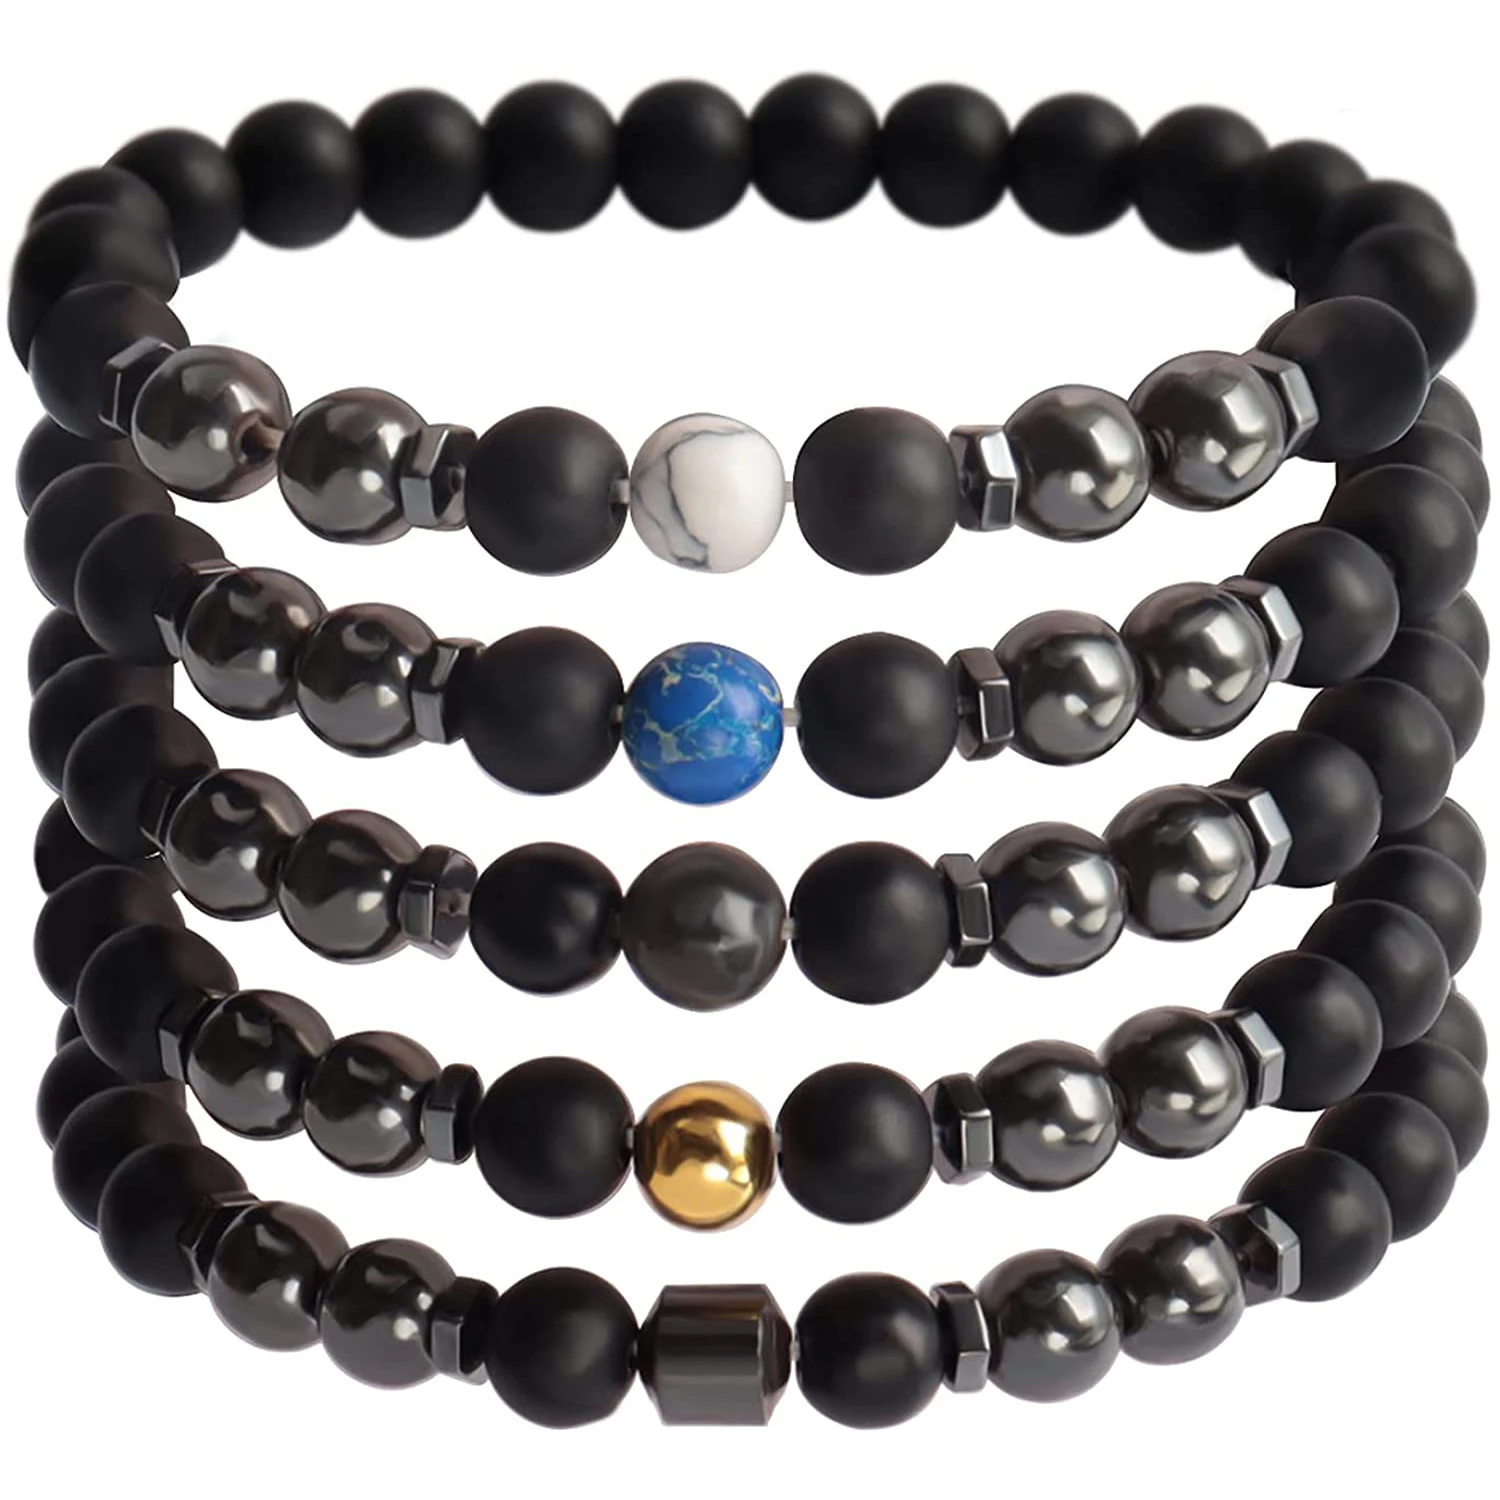 

Matte Onyx Beaded Stretch Bracelet Anklet Women Hematite Magnetic Gemstone Anti Therapy Bangle for Healing Chakra Weight Loss